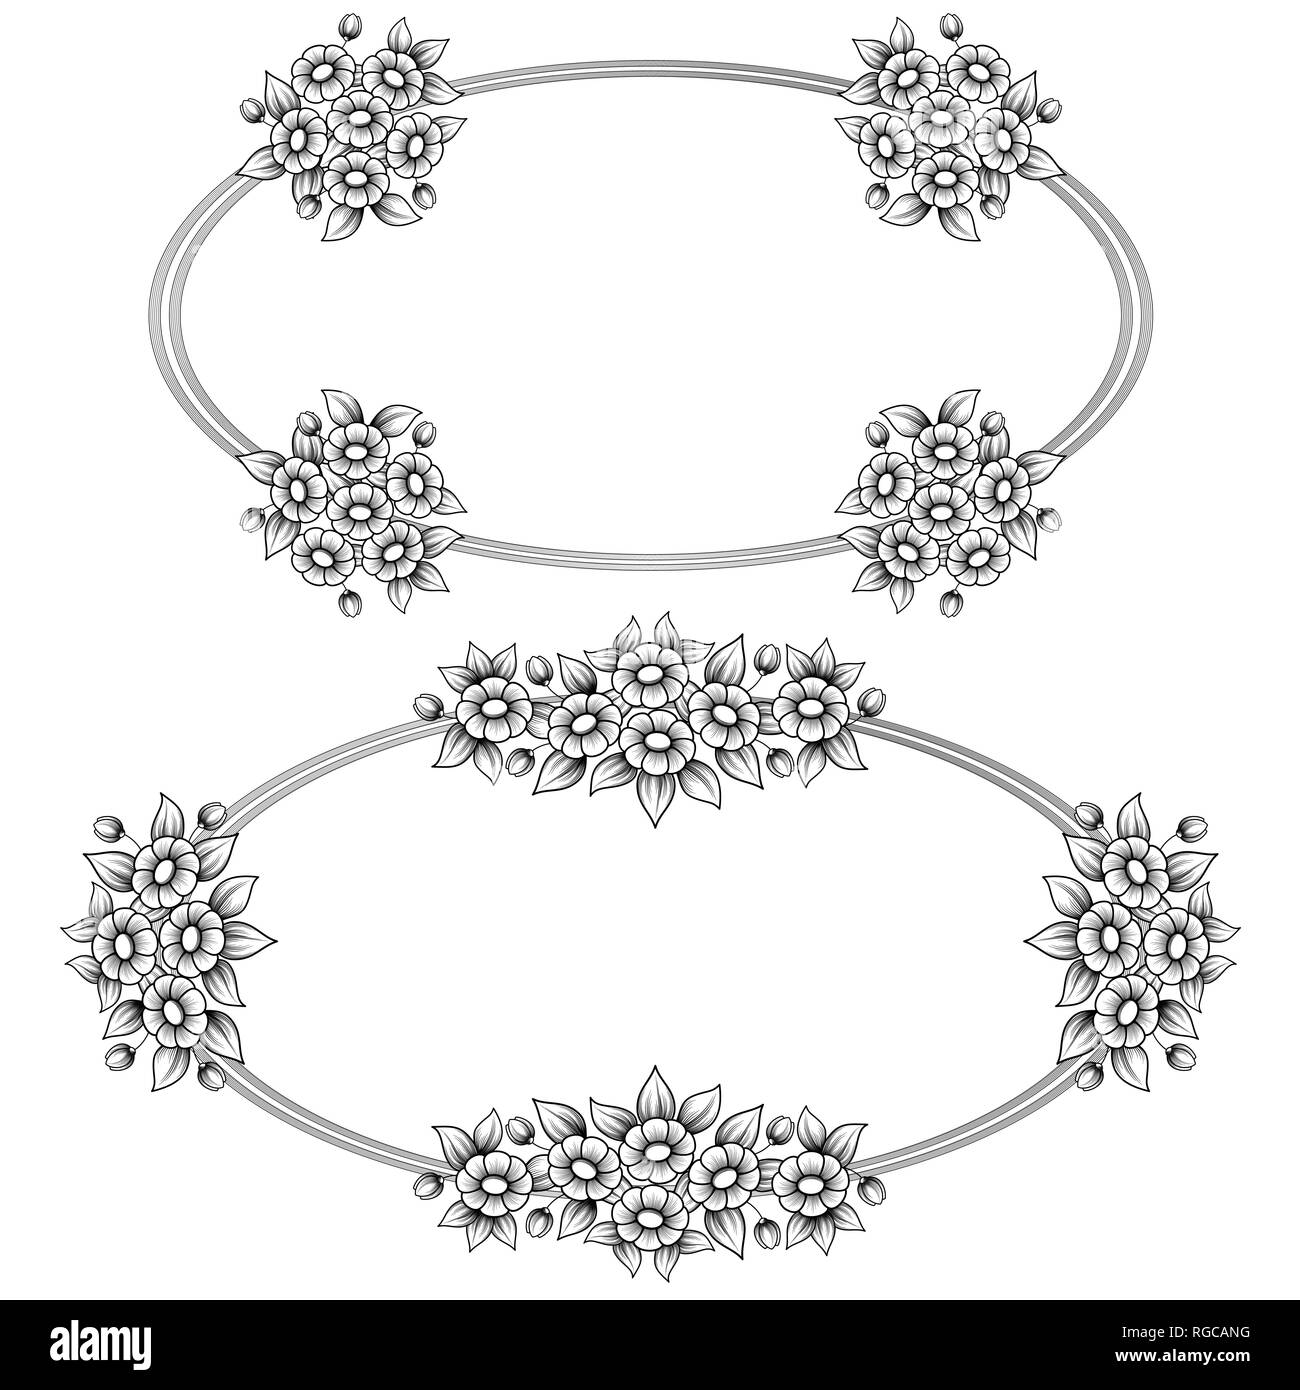 Two black and white oval frames with floral elements Stock Vector